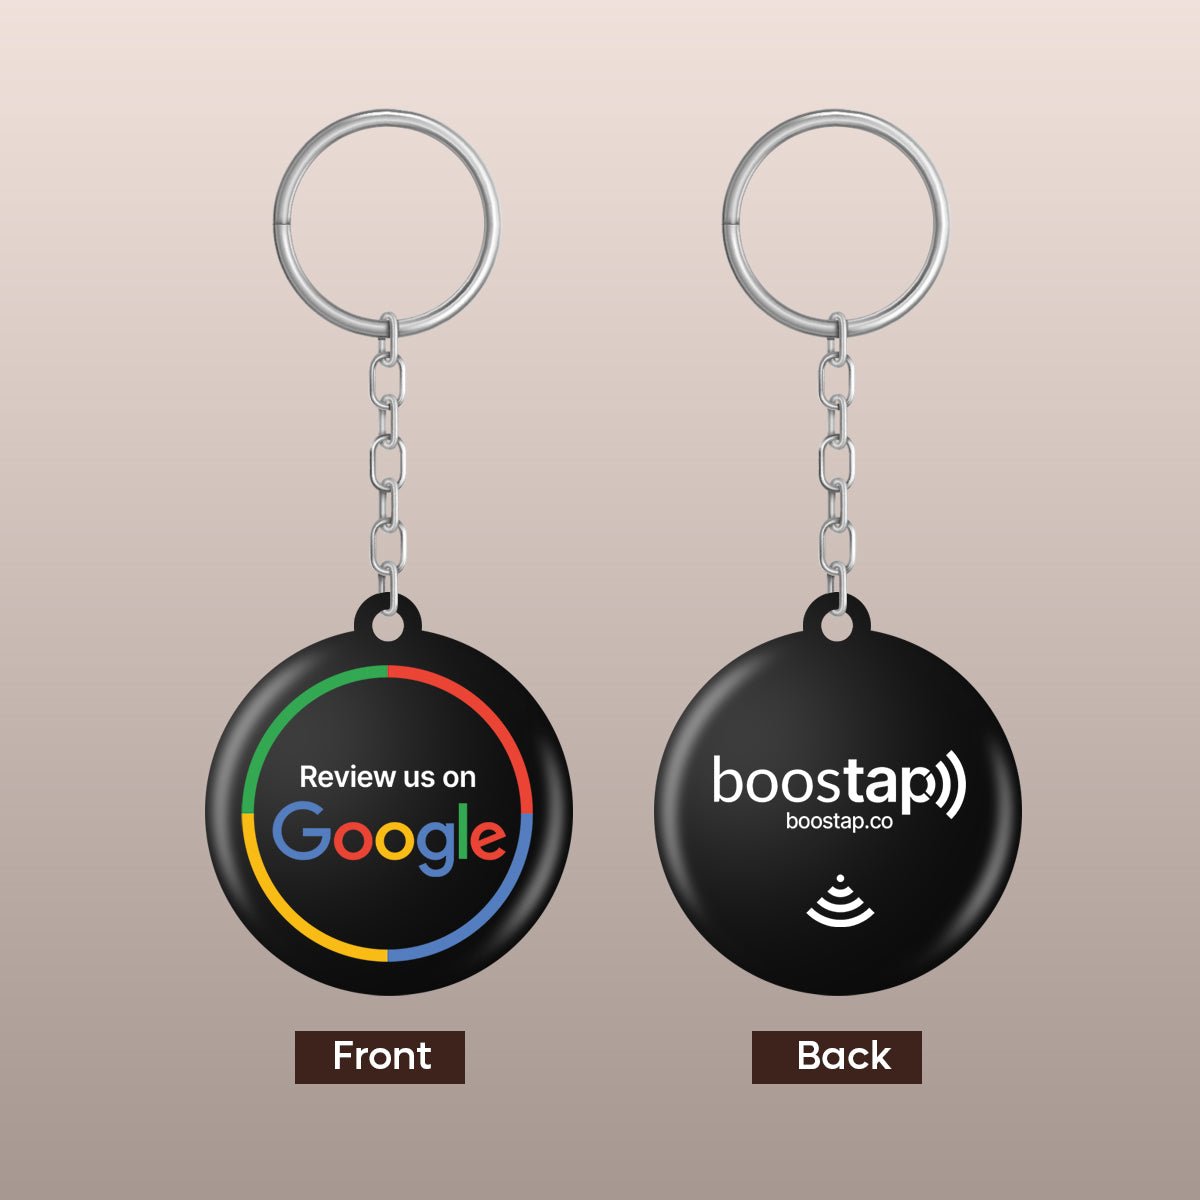 Boostap® Google Reviews Keychain - Boostap® Review Cards